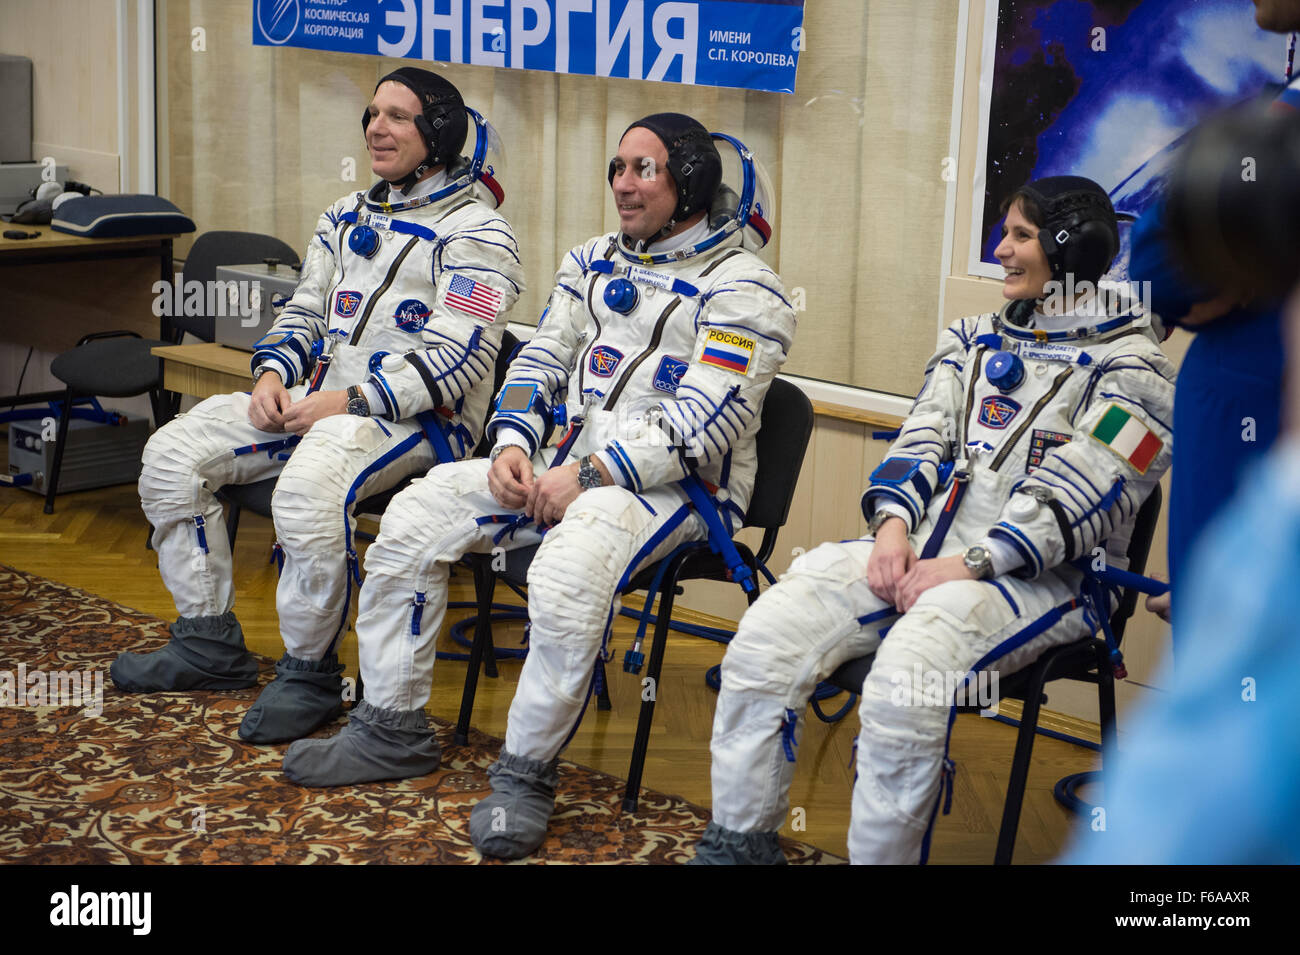 Expedition 42 crew members, Flight Engineer Terry Virts of NASA, left, Soyuz Commander Anton Shkaplerov of the Russian Federal Space Agency (Roscosmos), center, and Flight Engineer Samantha Cristoforetti of the European Space Agency (ESA), right, prepare for pressure checks of their Sokol suits in Building 254 following their suit up for launch, Sunday, Nov. 23, 2014, at the Baikonur Cosmodrome in Kazakhstan. Launch of the Soyuz rocket is scheduled for the early hours of Nov. 24 and will carry Virts, Shkaplerov, and Cristoforetti into orbit to begin their five and a half month mission on the I Stock Photo